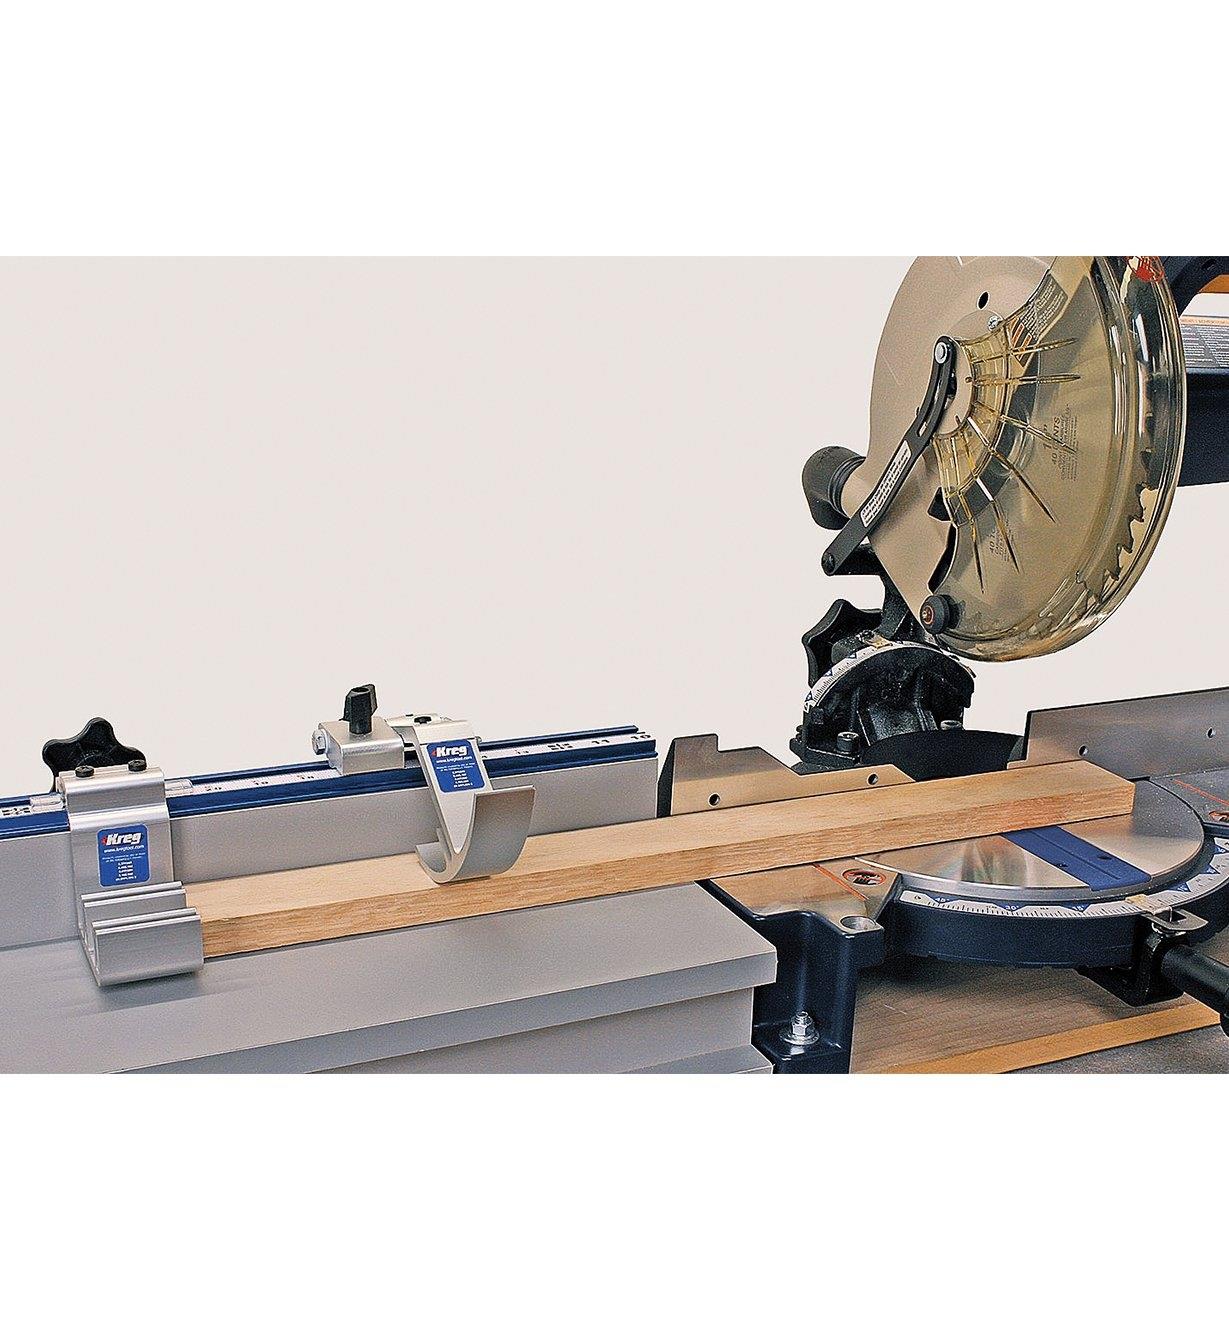 The Kreg Trak and Stop System being used with a miter saw to cut a piece of wood to exact length